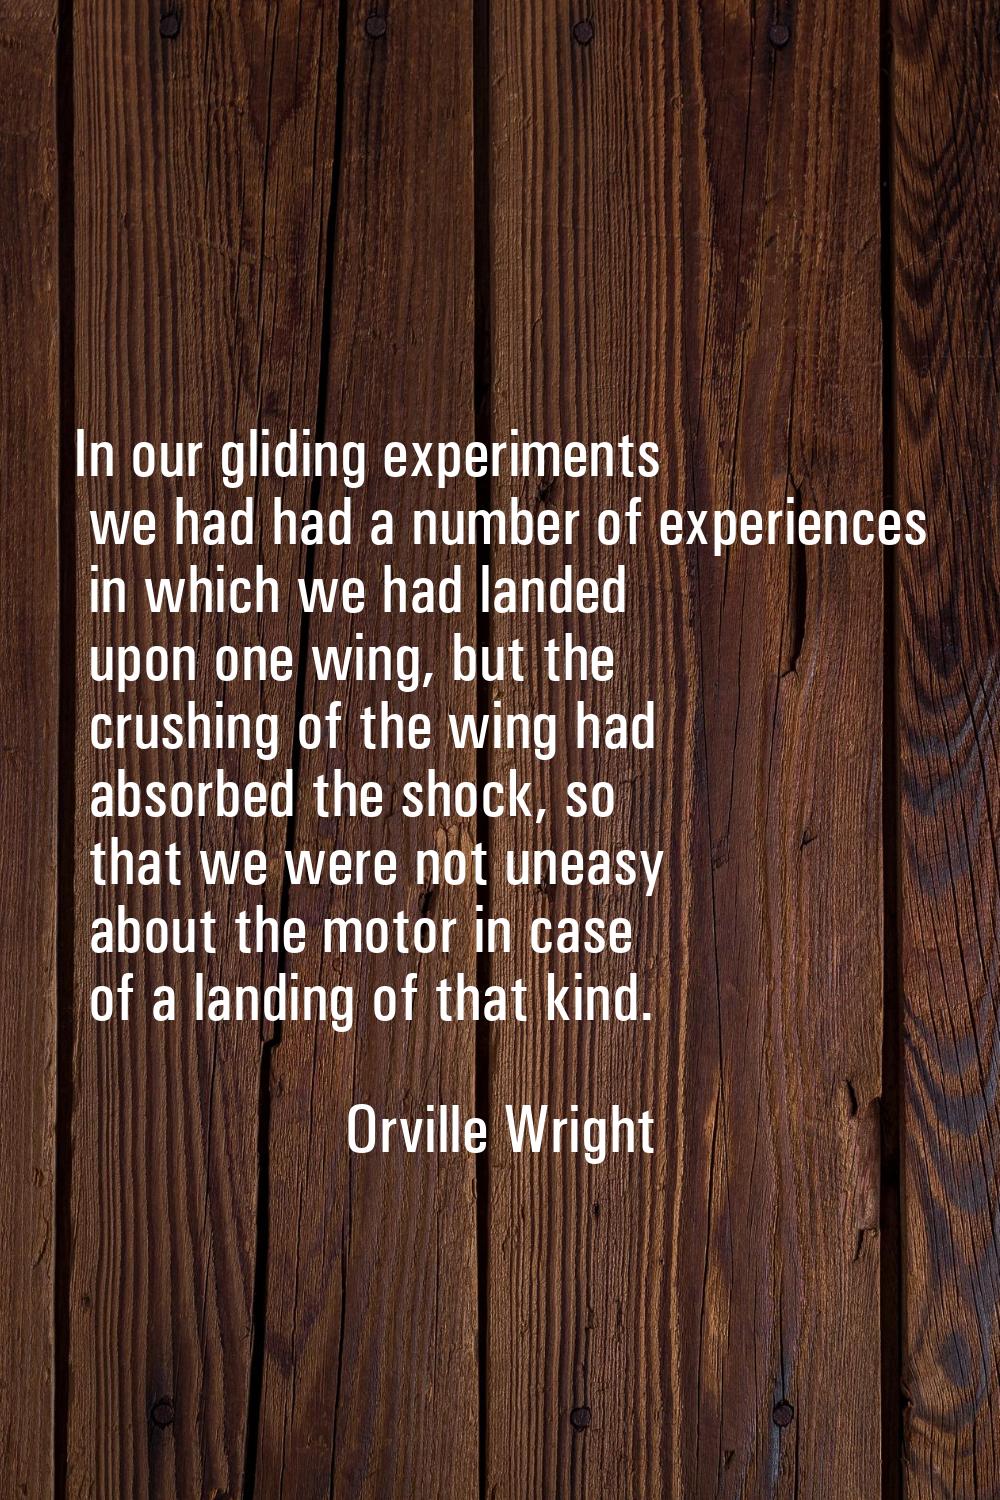 In our gliding experiments we had had a number of experiences in which we had landed upon one wing,